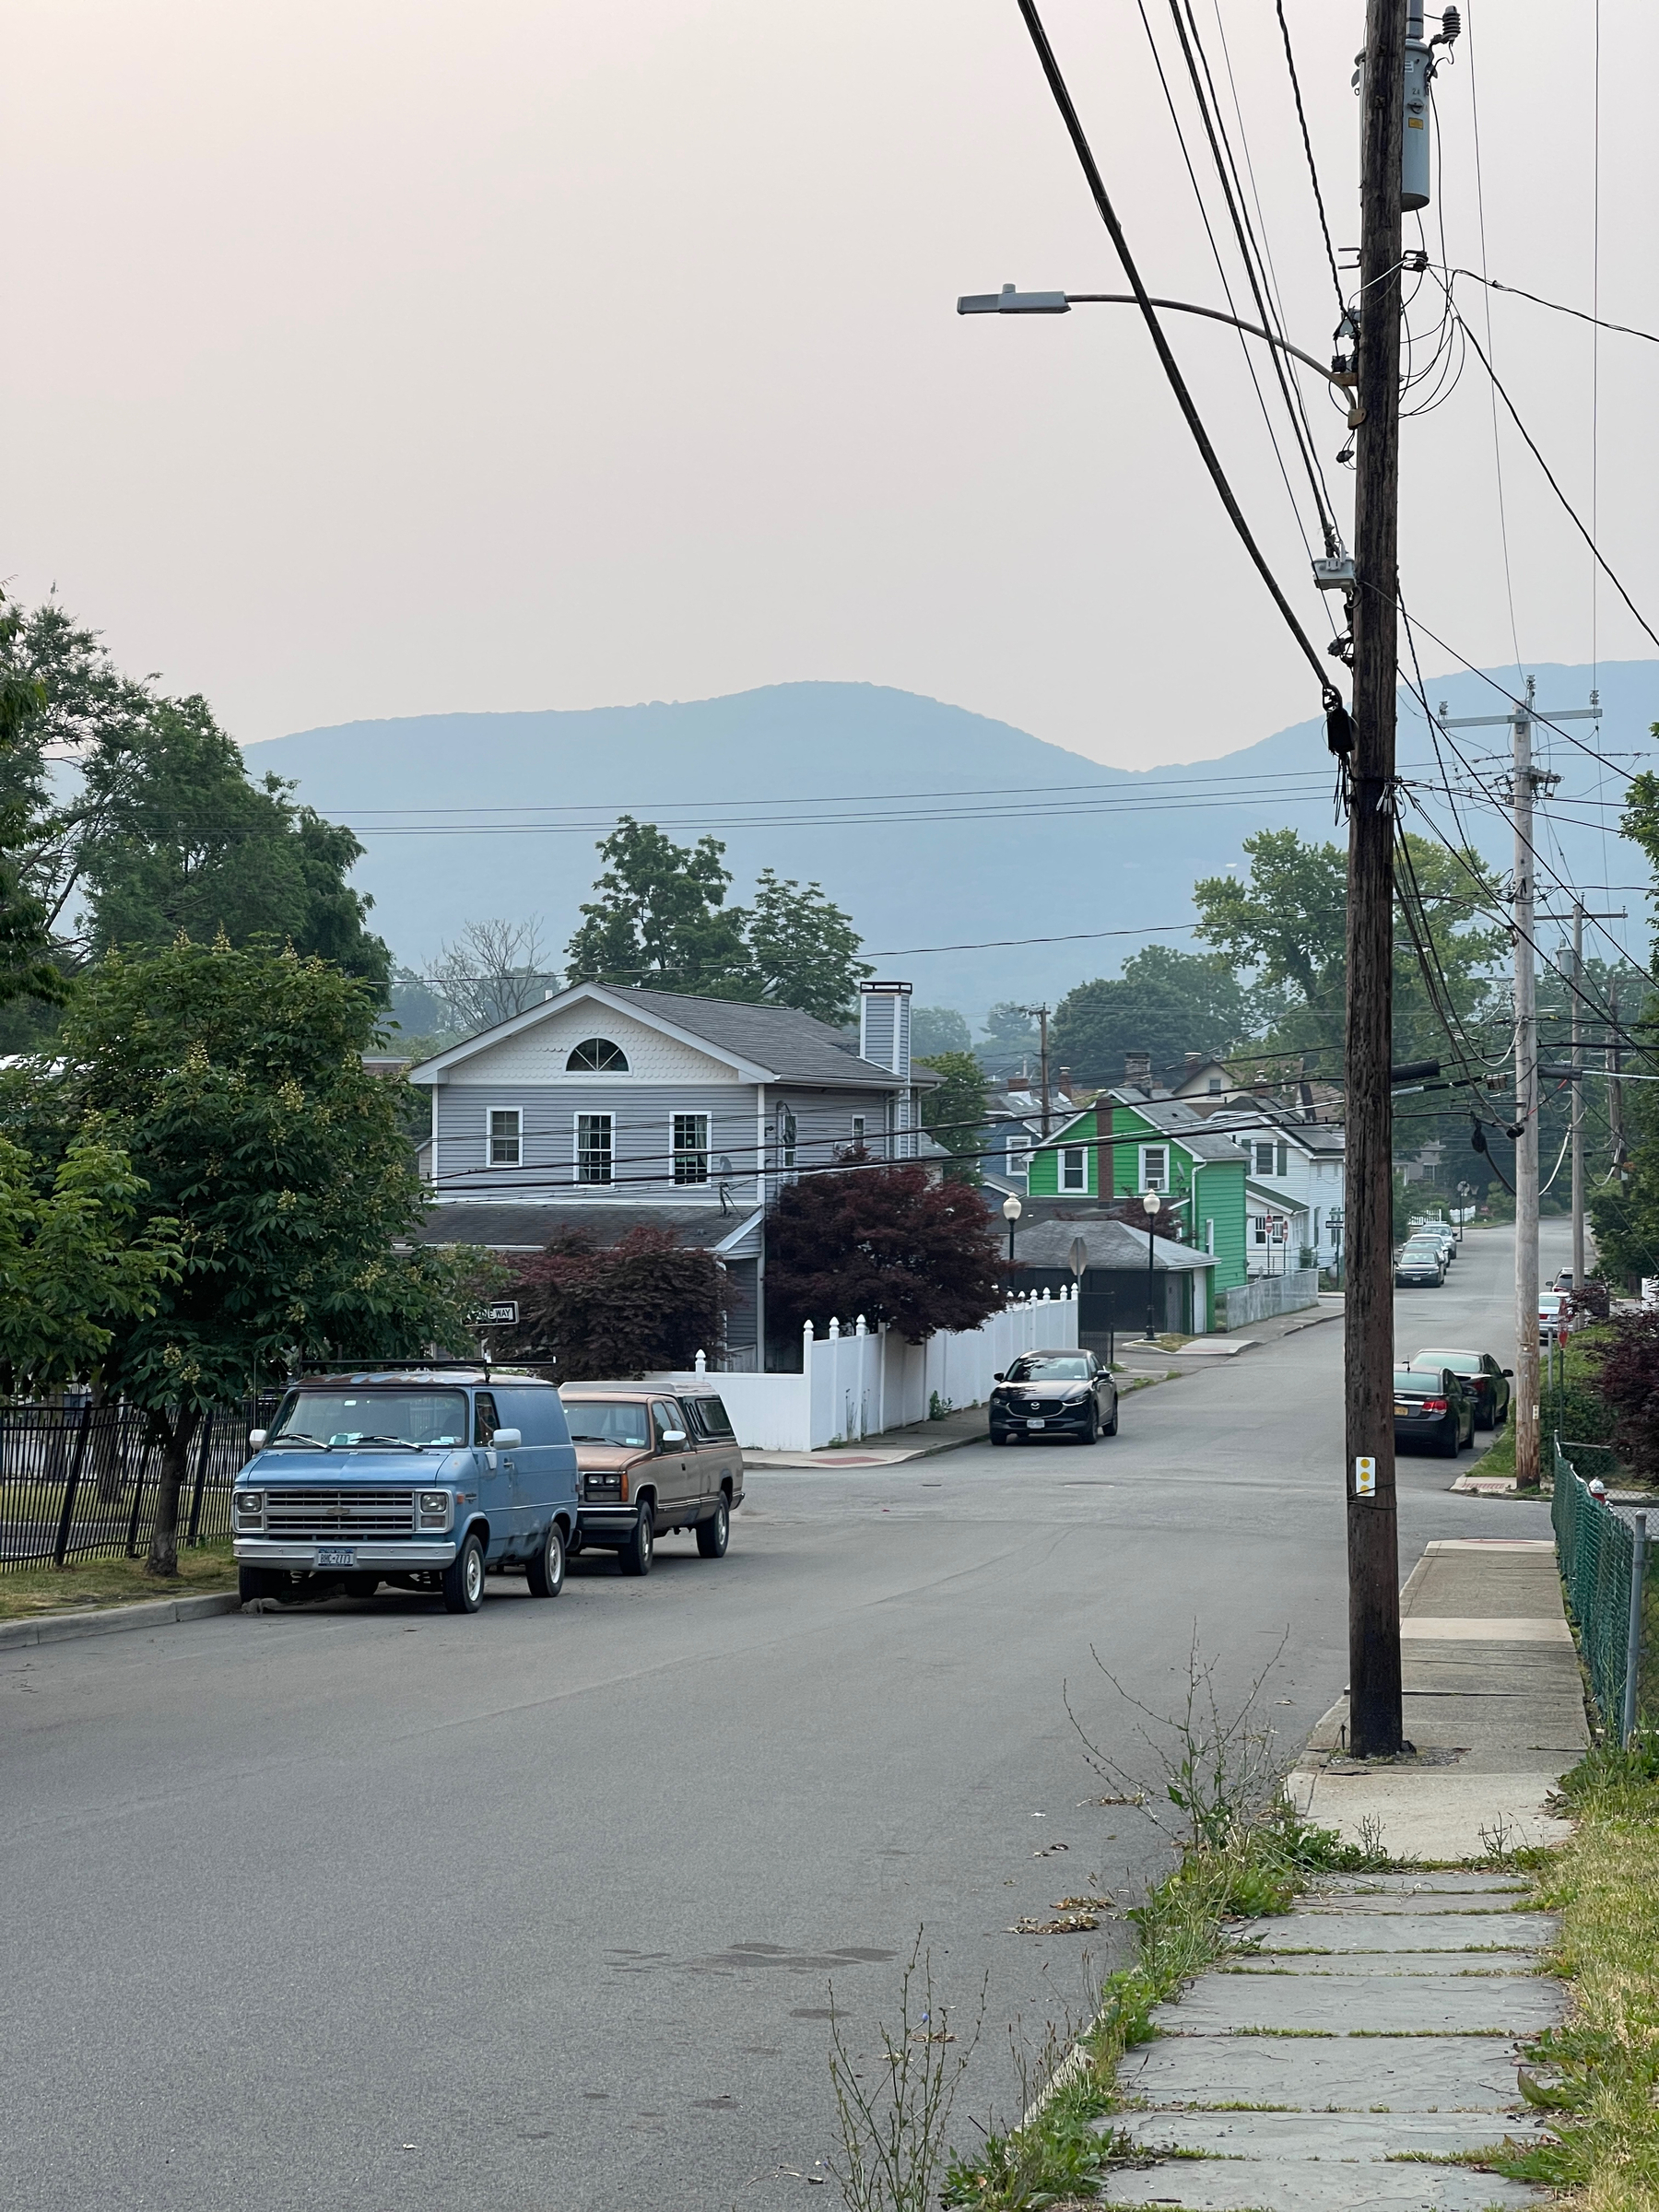 View down the street in Beacon, NY, mountains partially obscured by wildfire smoke.